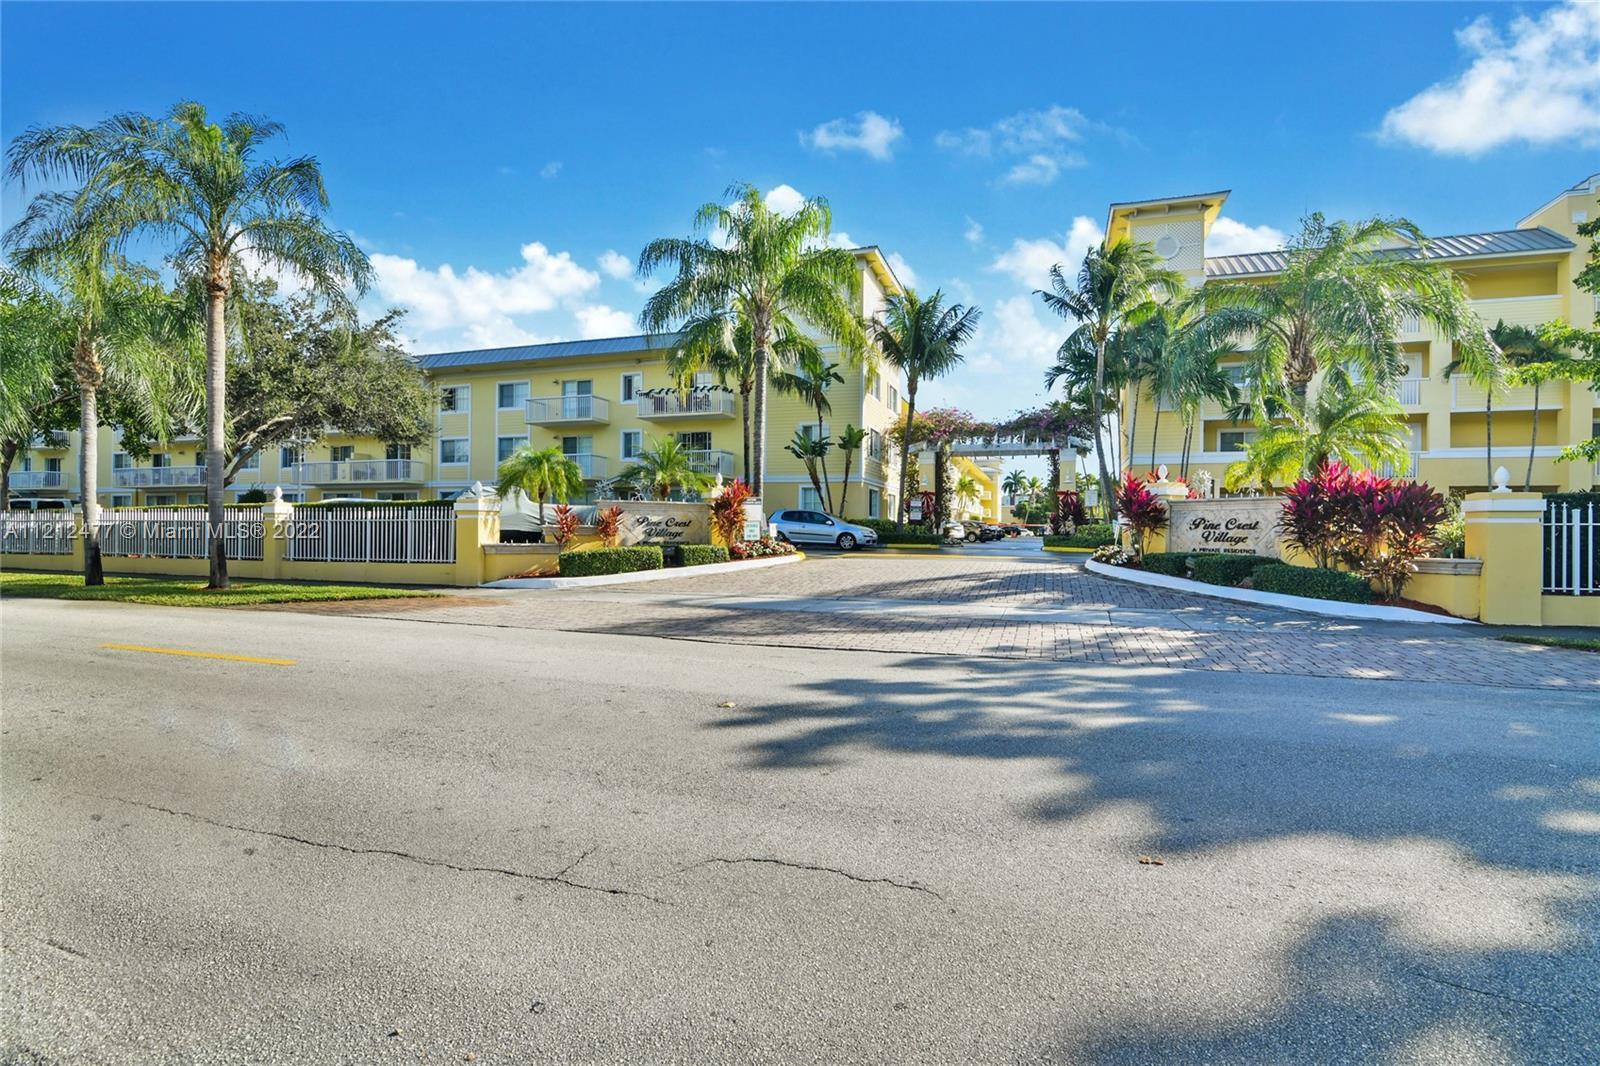 Pine Crest Village in the heart of Victoria Park, only 3-blocks South of " Las Olas Blvd" and 4-bloc